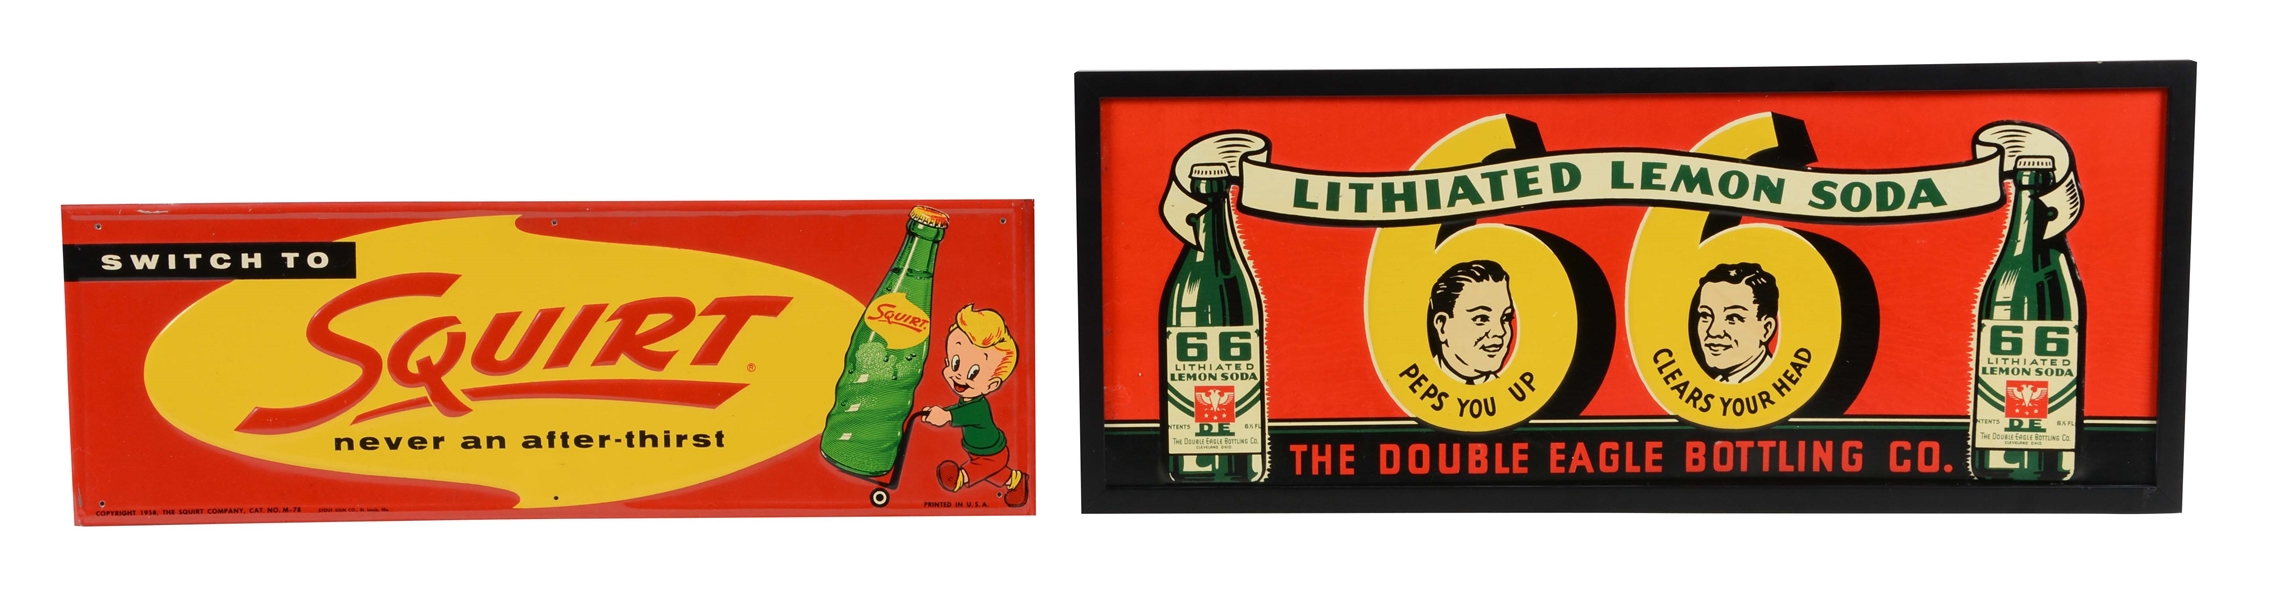 LOT OF 2: SQUIRT AND 66 LEMON SODA EMBOSSED ADVERTISING SIGNS.